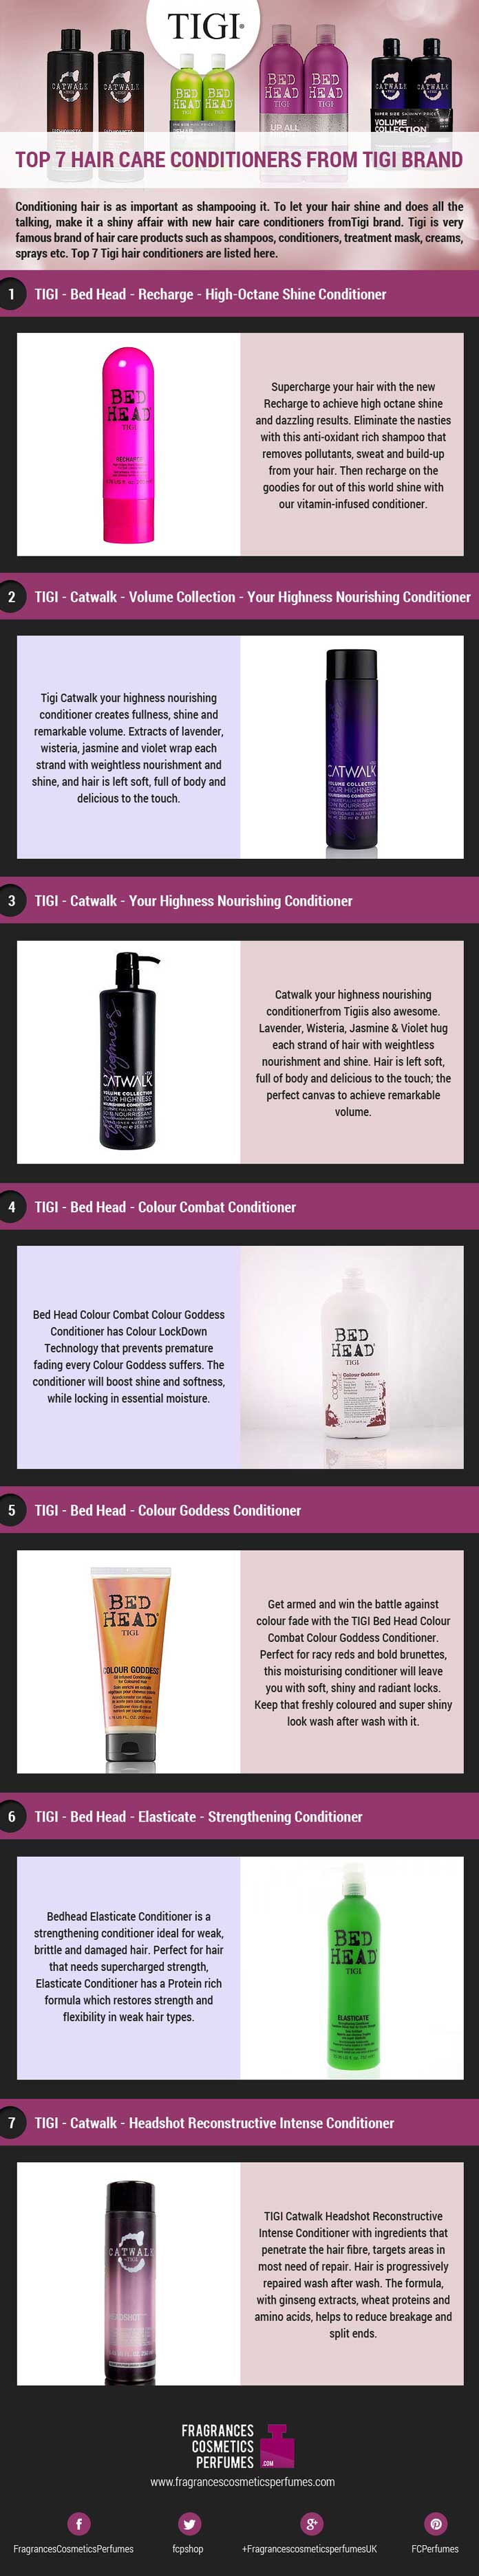 Top 7 Hair Care Conditioners from Tigi Brand